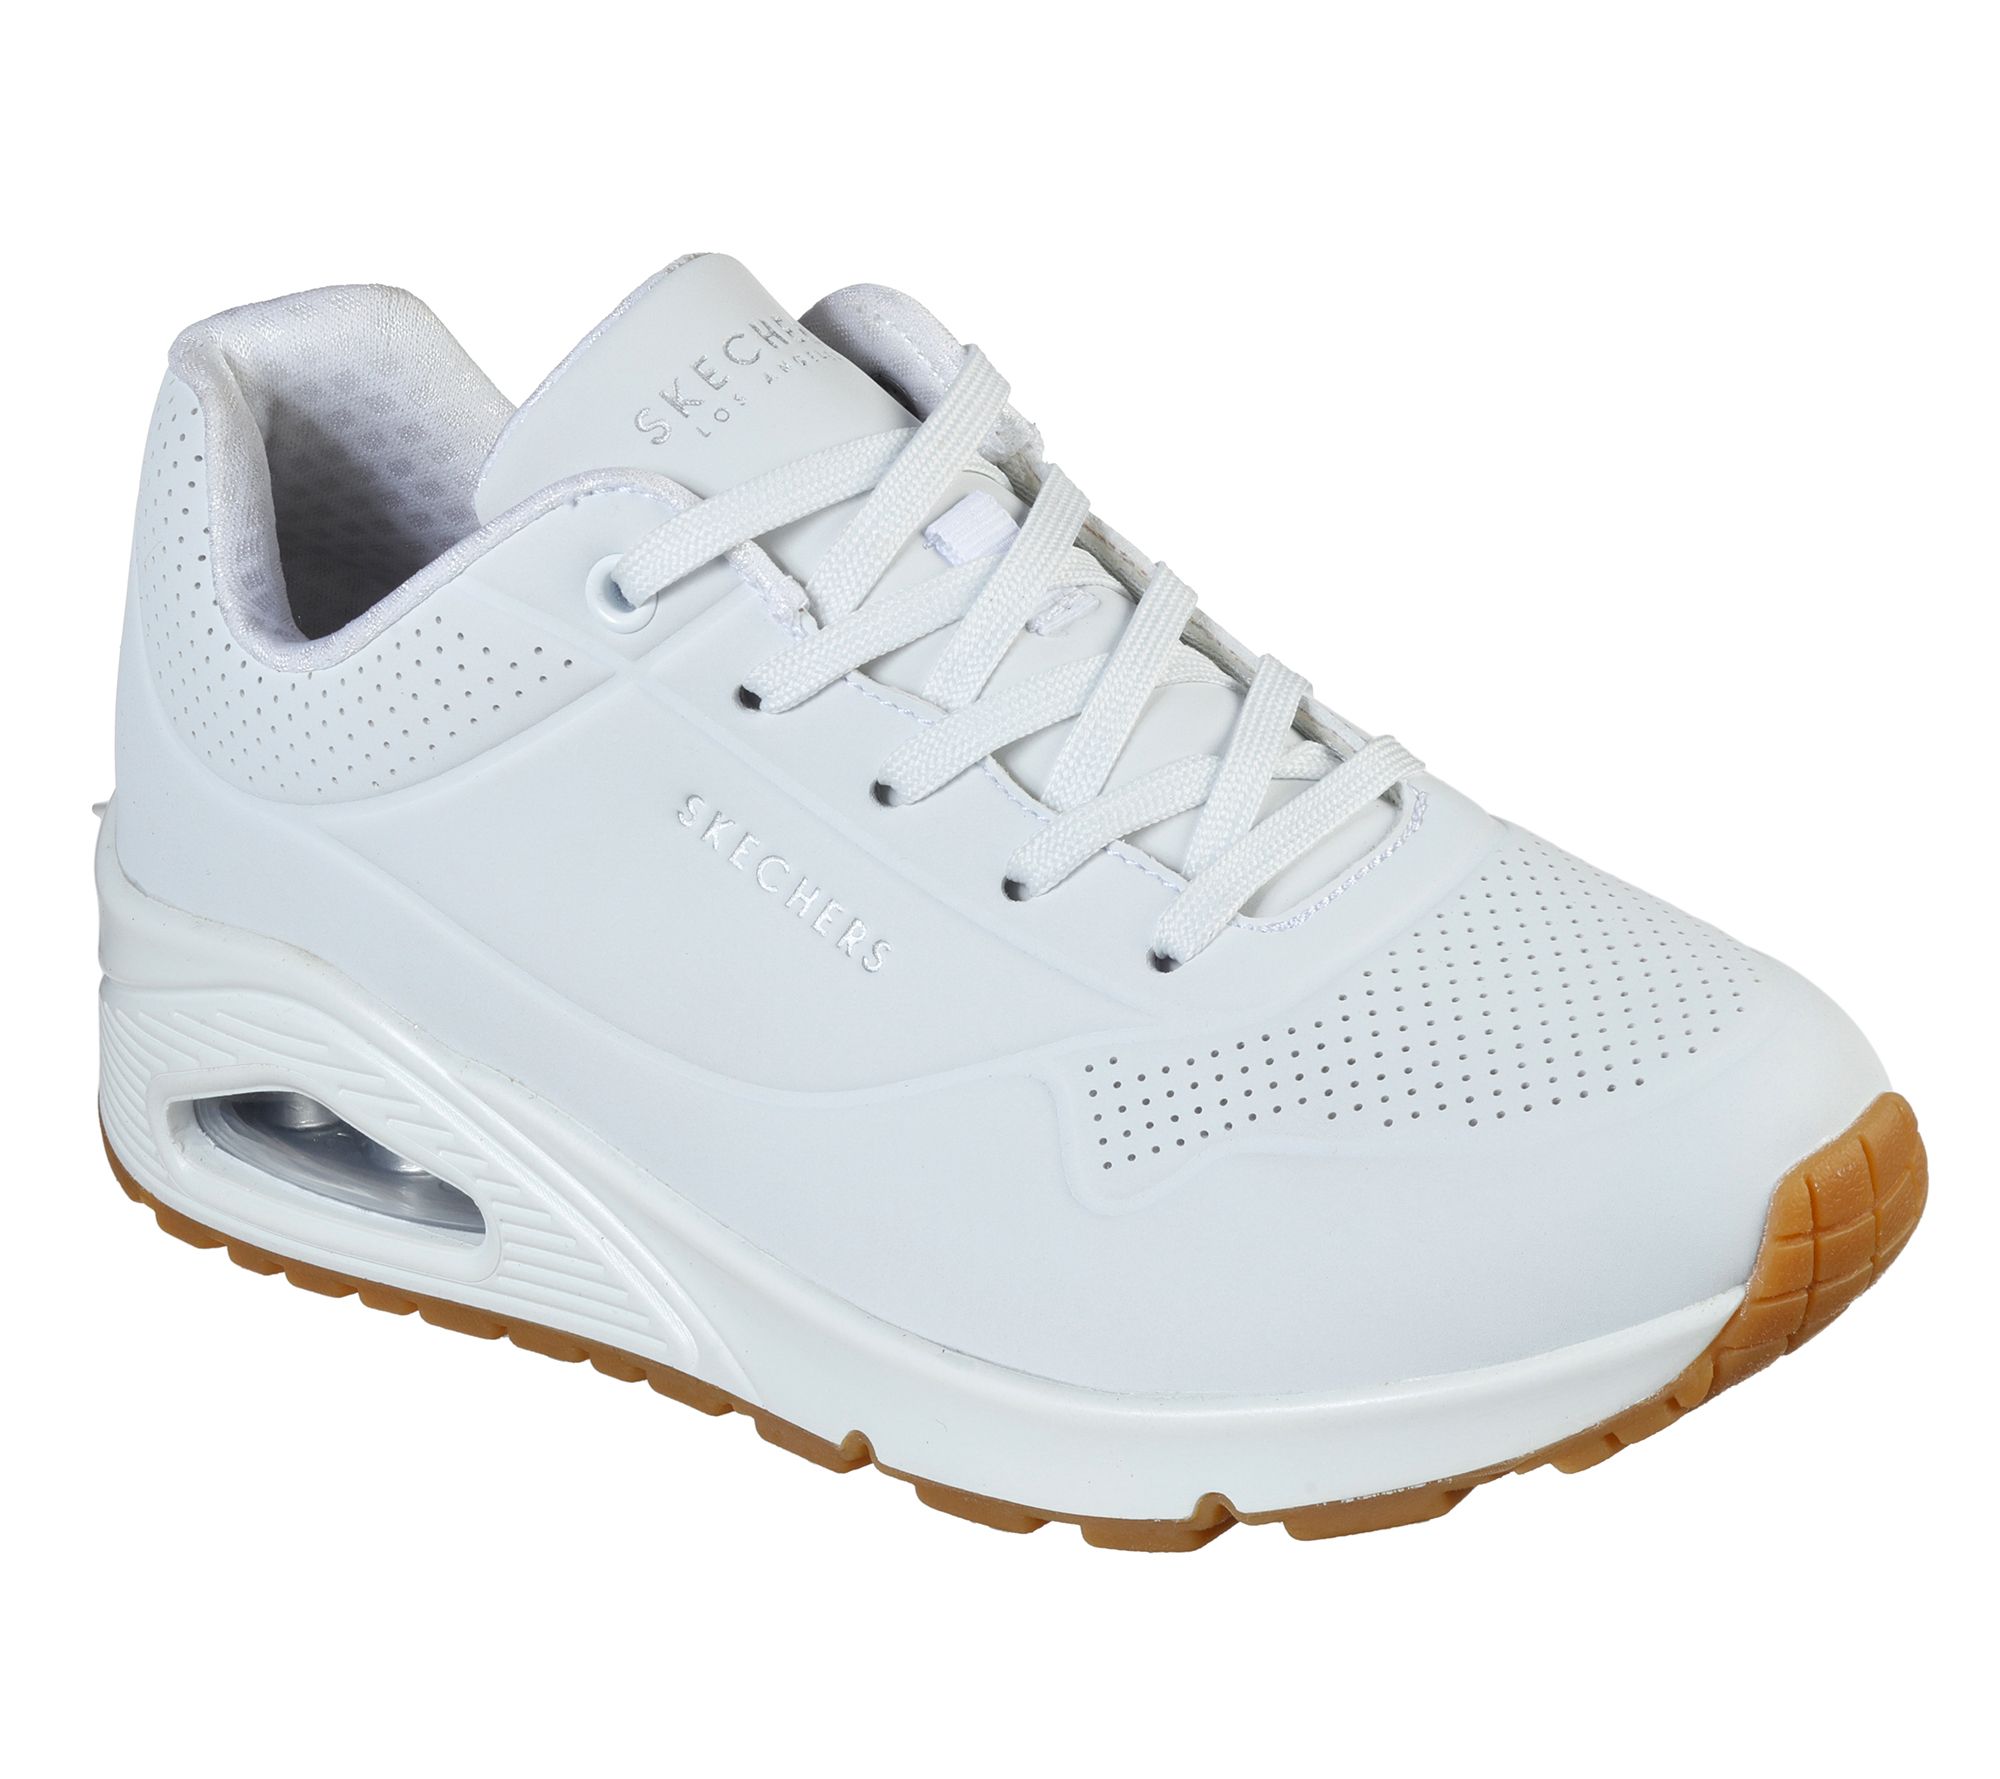 skechers therapeutic shoes